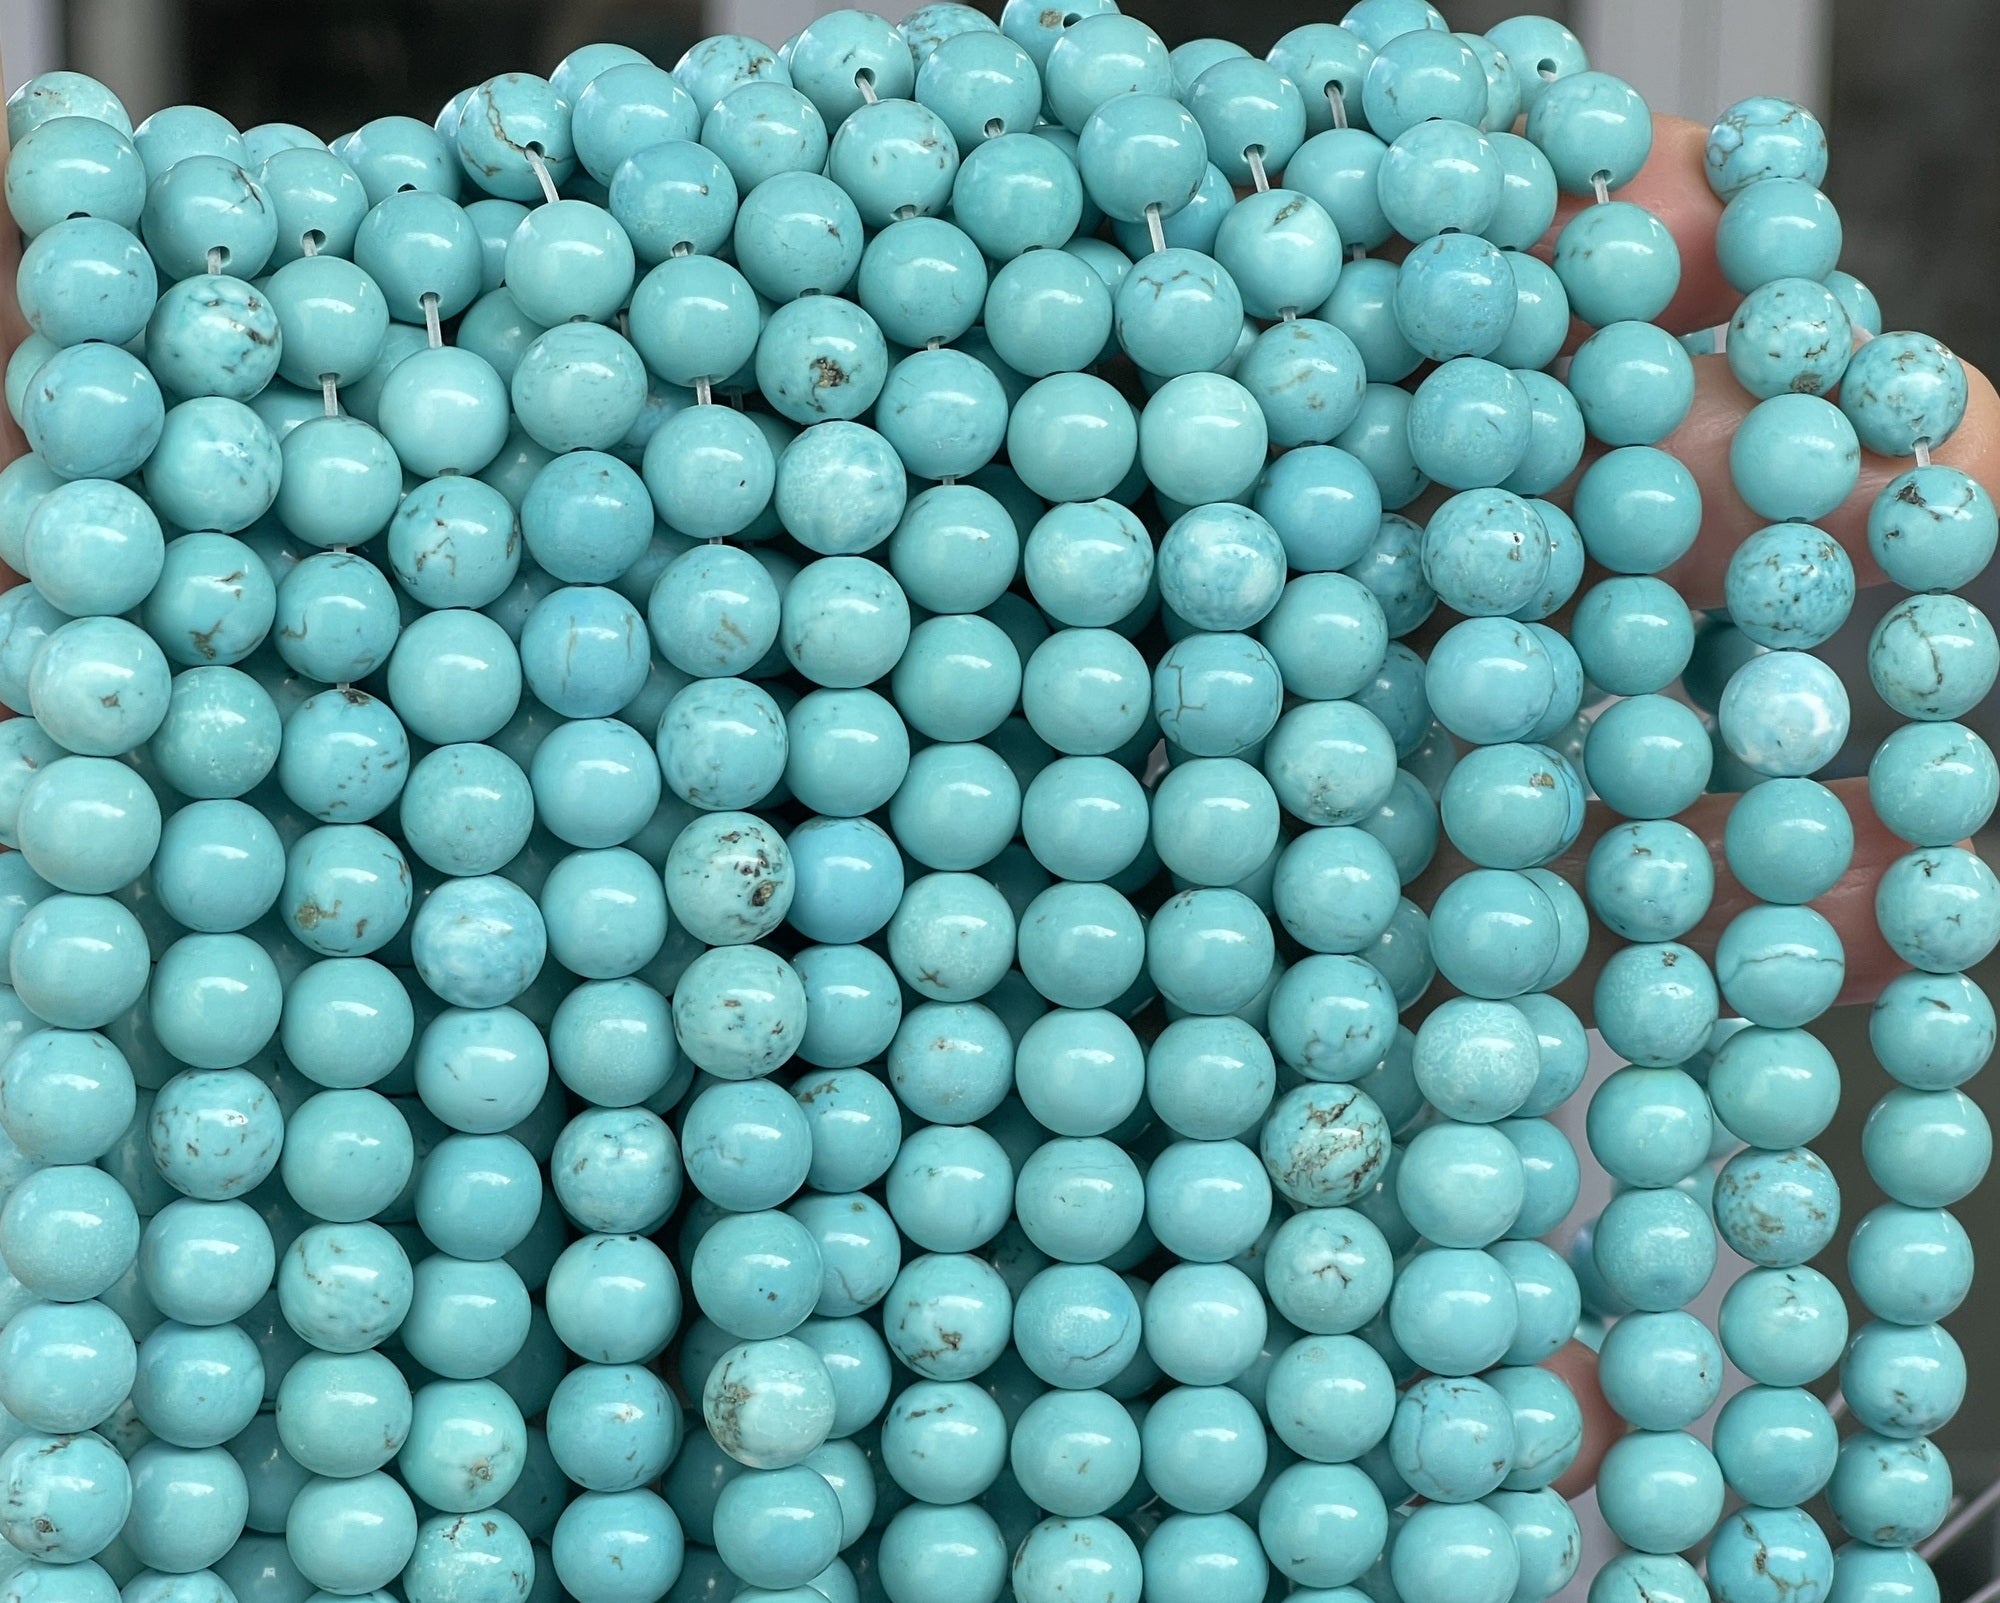 Chinese Blue Turquoise 8mm round stabilized turquoise beads 15" strand